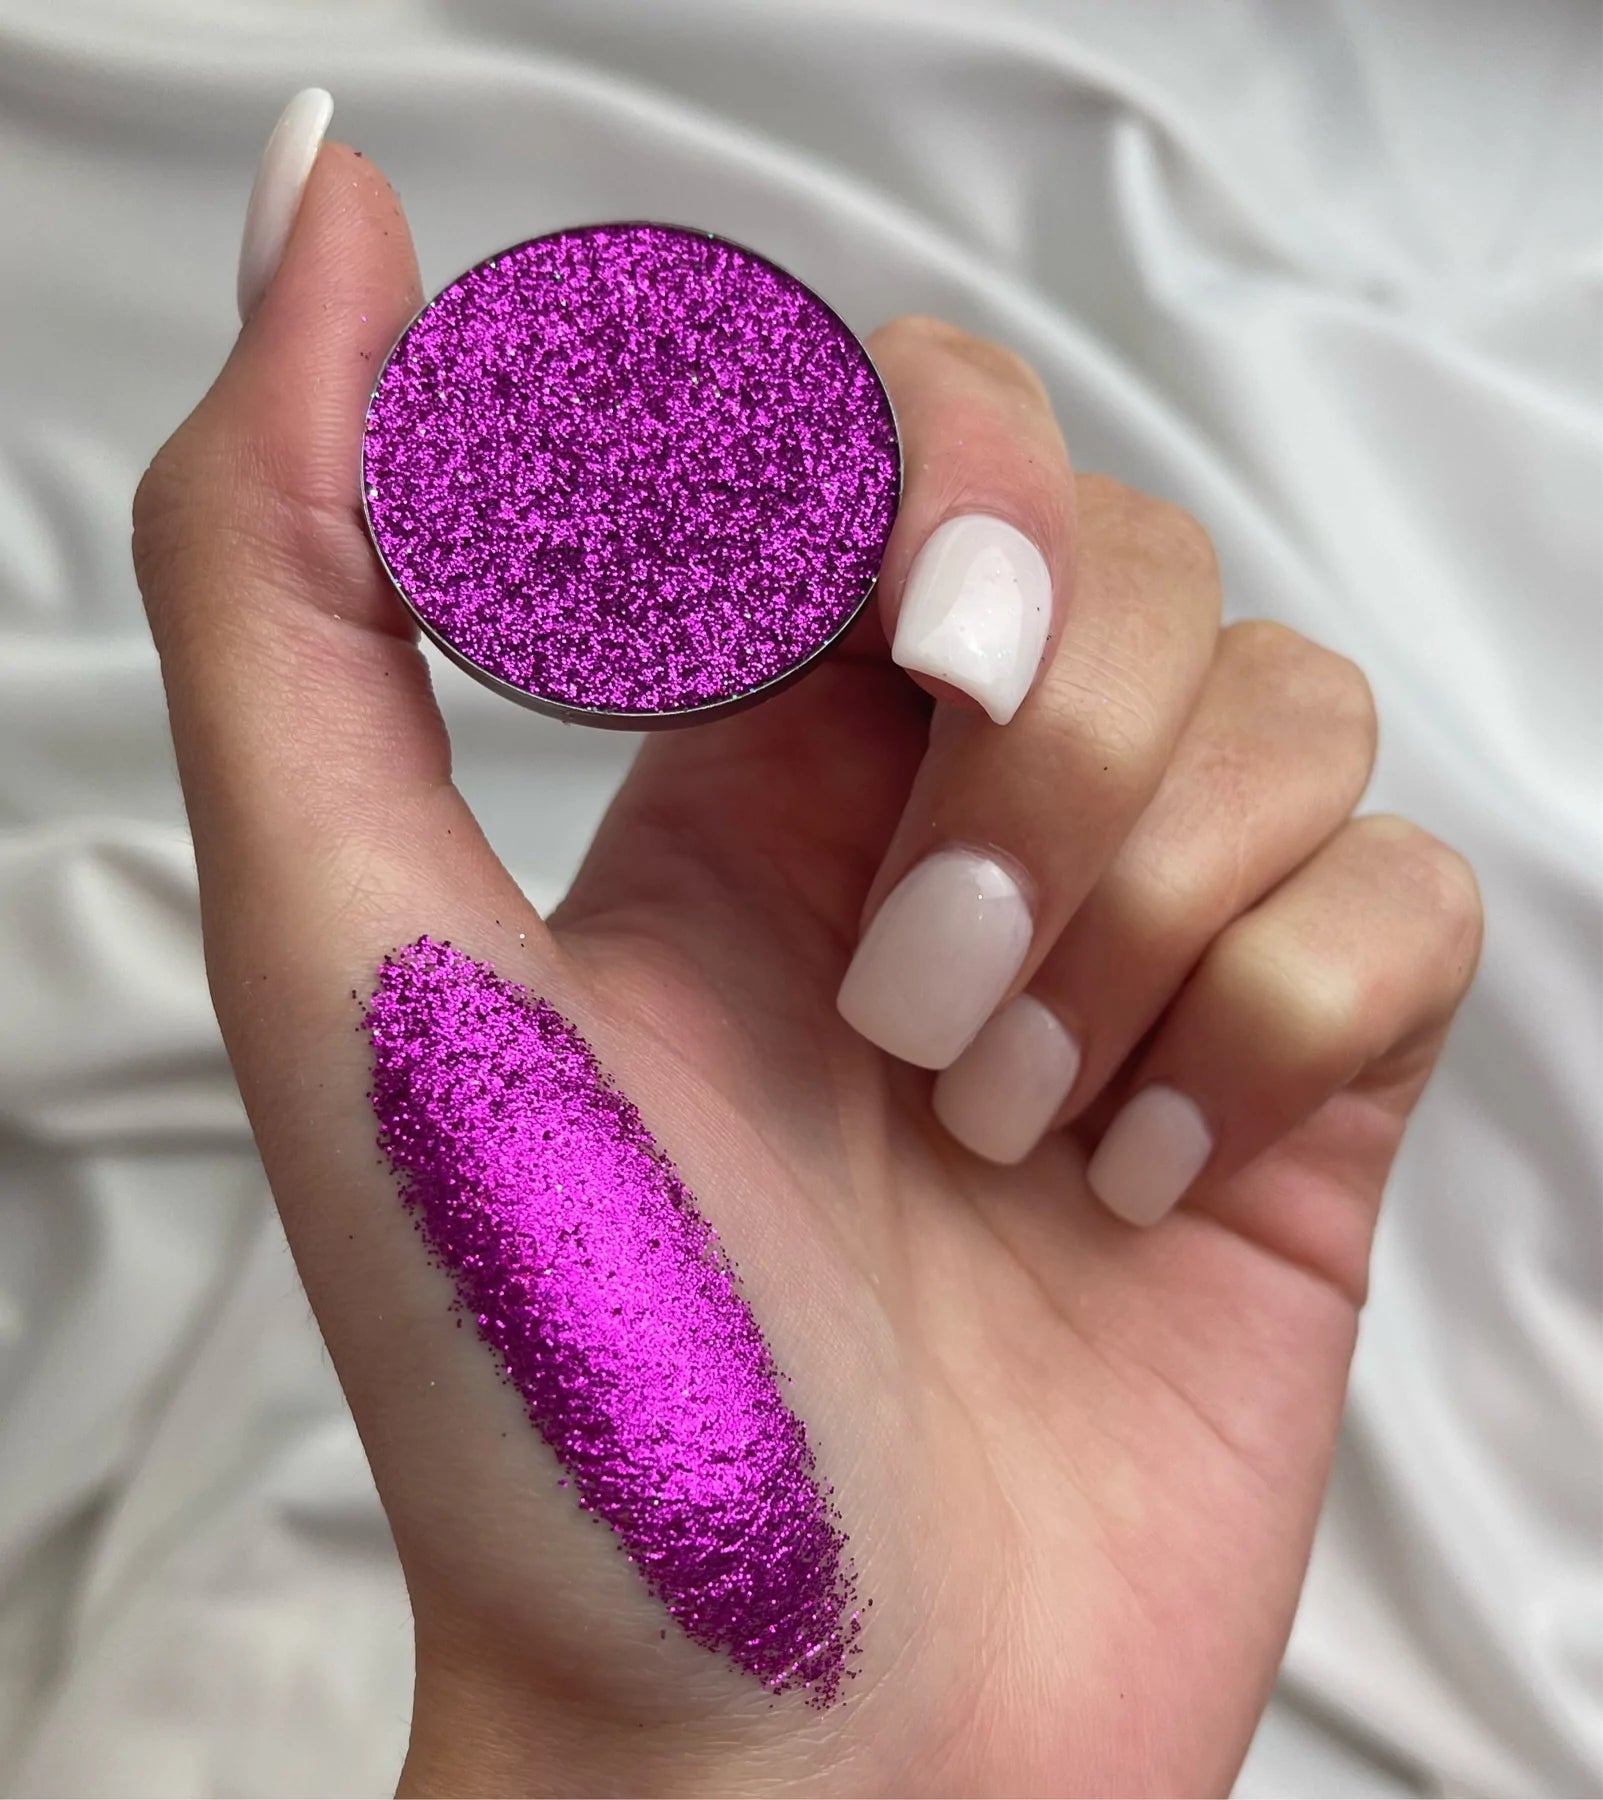 With Love Cosmetics - Pressed Glitter Sorbet